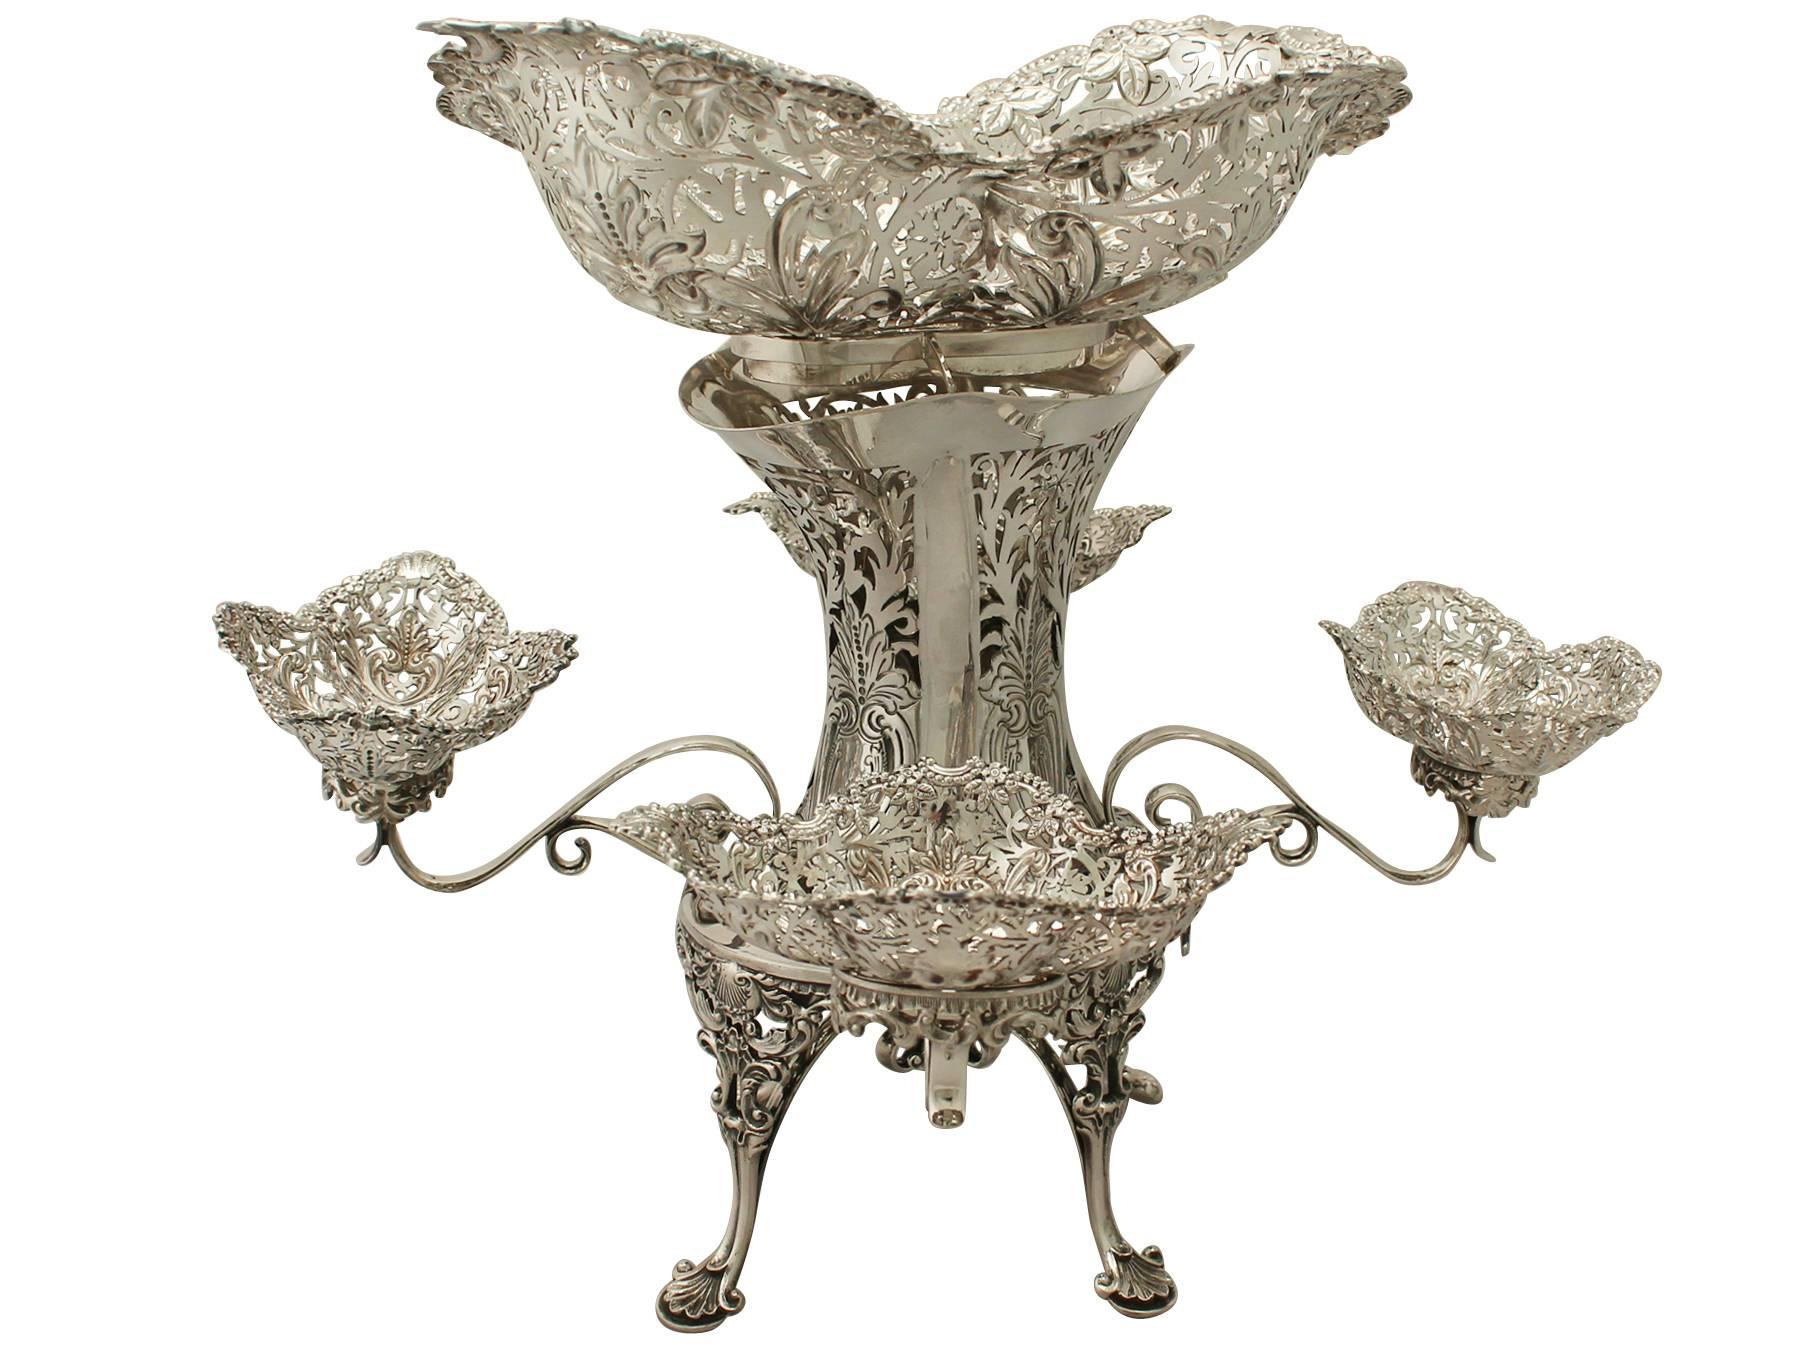 An exceptional, fine and impressive antique Edwardian English sterling silver epergne/centerpiece; an addition to our ornamental silverware collection.

This magnificent Edwardian sterling silver centerpiece has an oval waisted shaped form supported